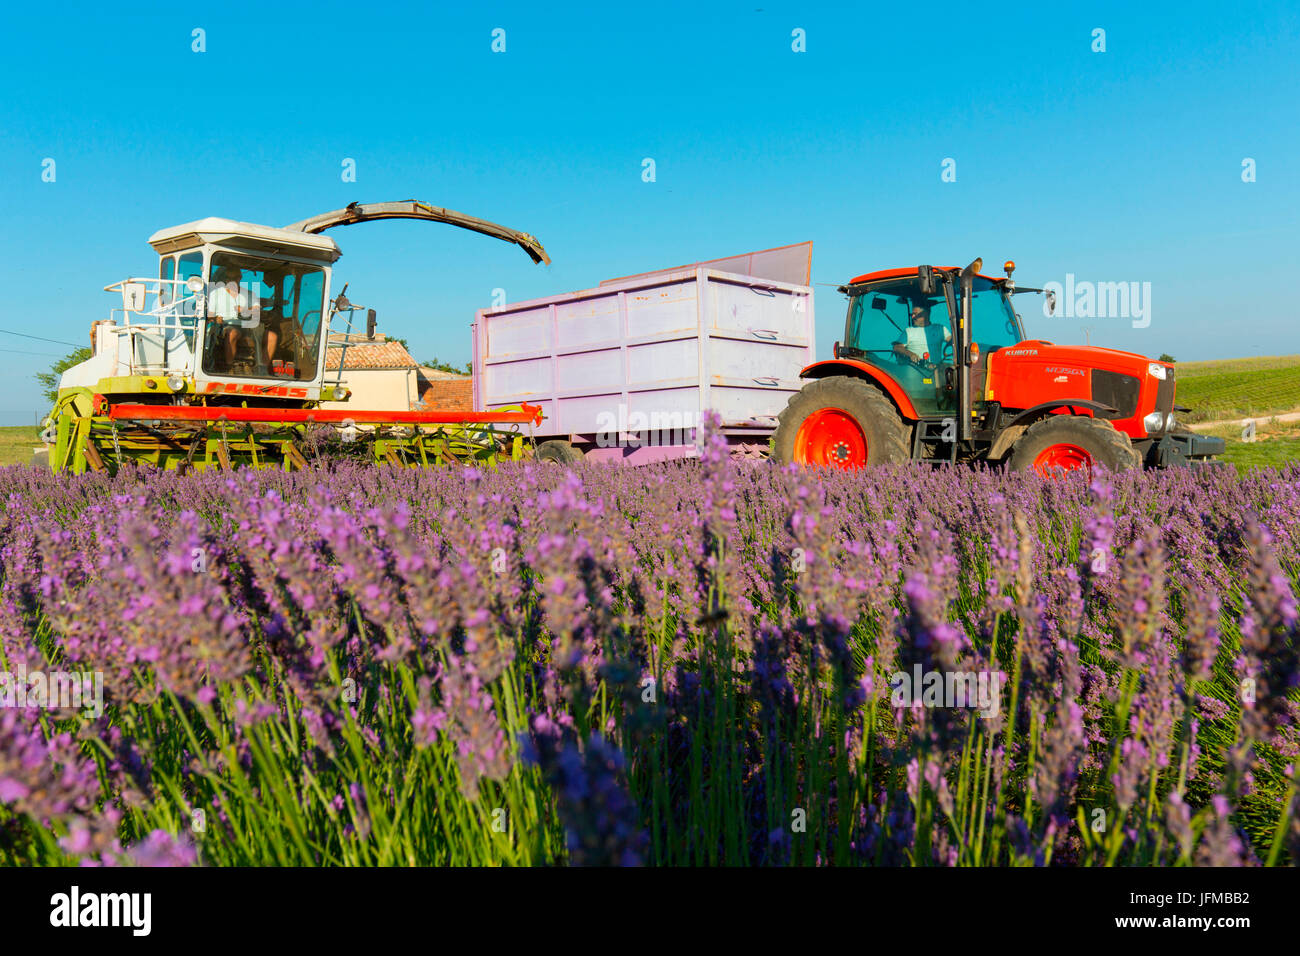 Europe, France, Provence Alpes Cote d'Azur, Plateau of Valensole, Workers begin harvesting first rows of lavender Stock Photo